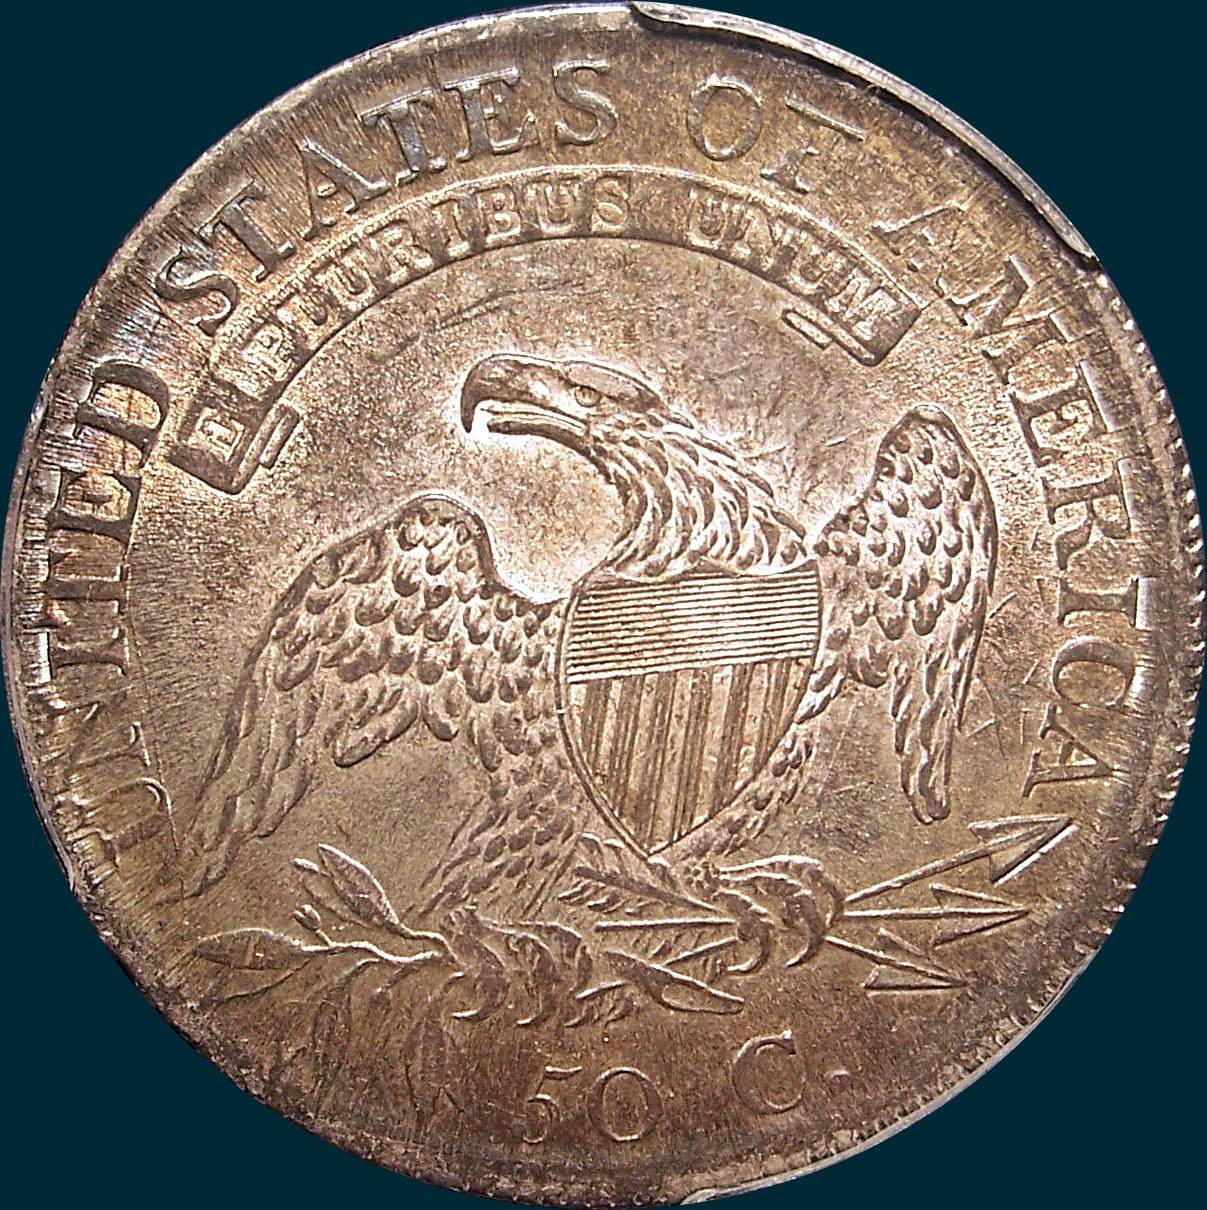 1811, O-108a , Small 8,Capped Bust, Half Dollar